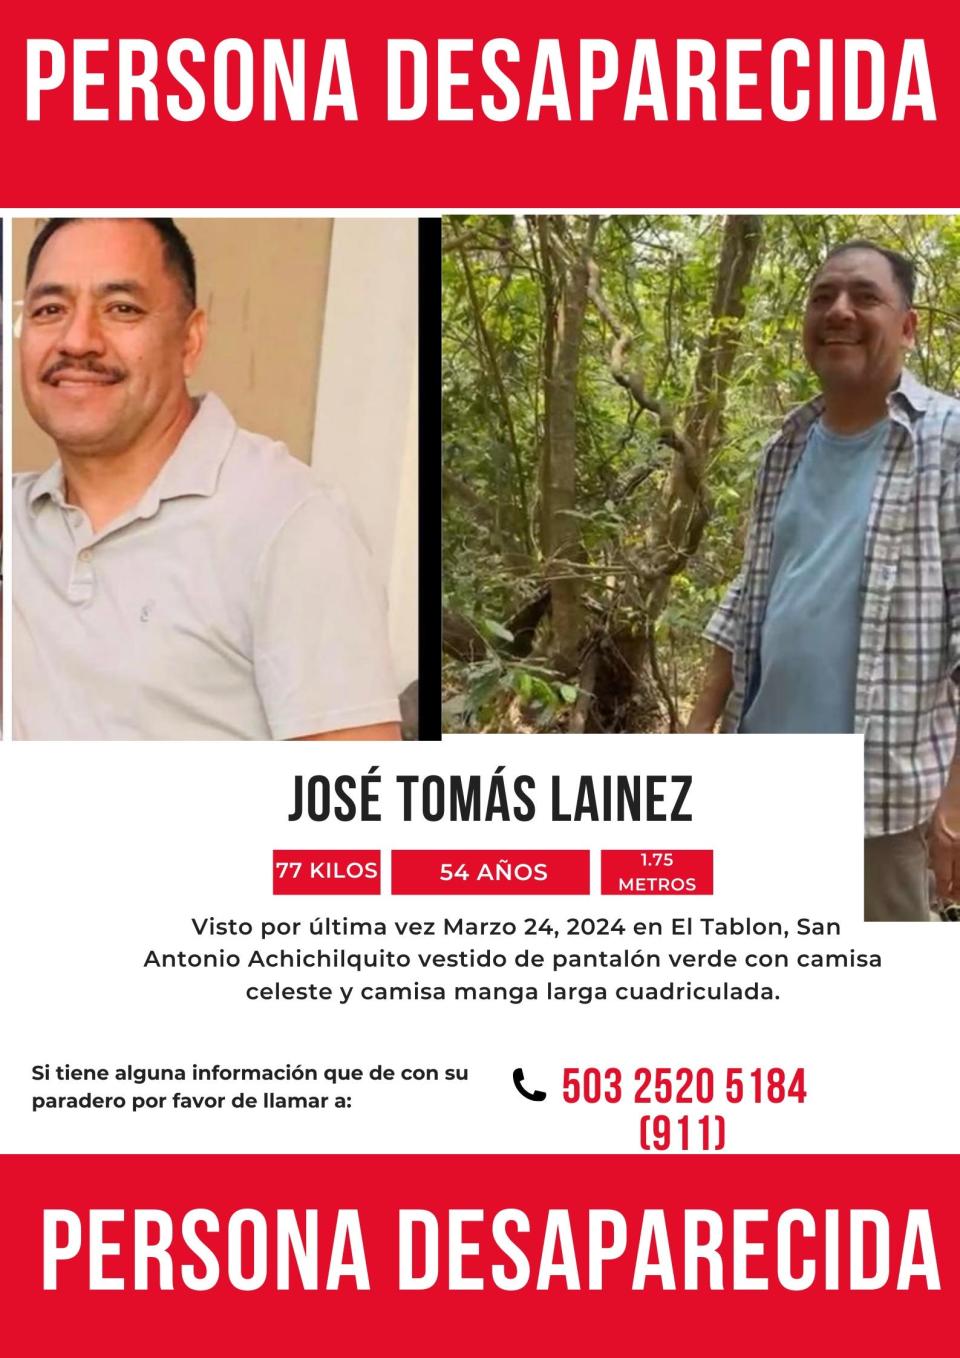 A missing person's poster for José Tomás Lainez, a 54-year-old Los Angeles man who was hiking on March 24, 2024 in El Salvador when he went missing.